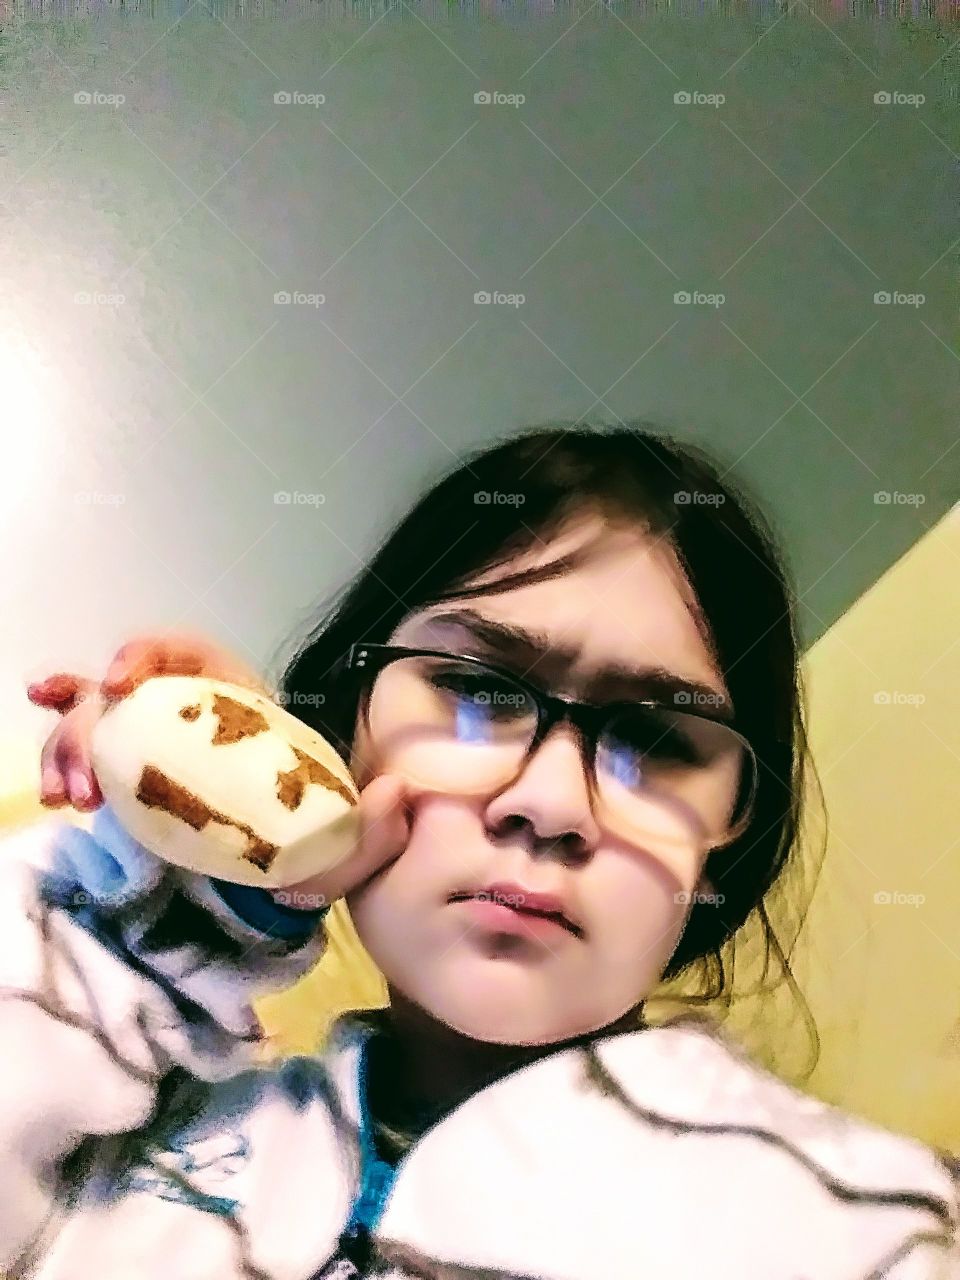 angry potato poses with grumpy kid wearing glasses